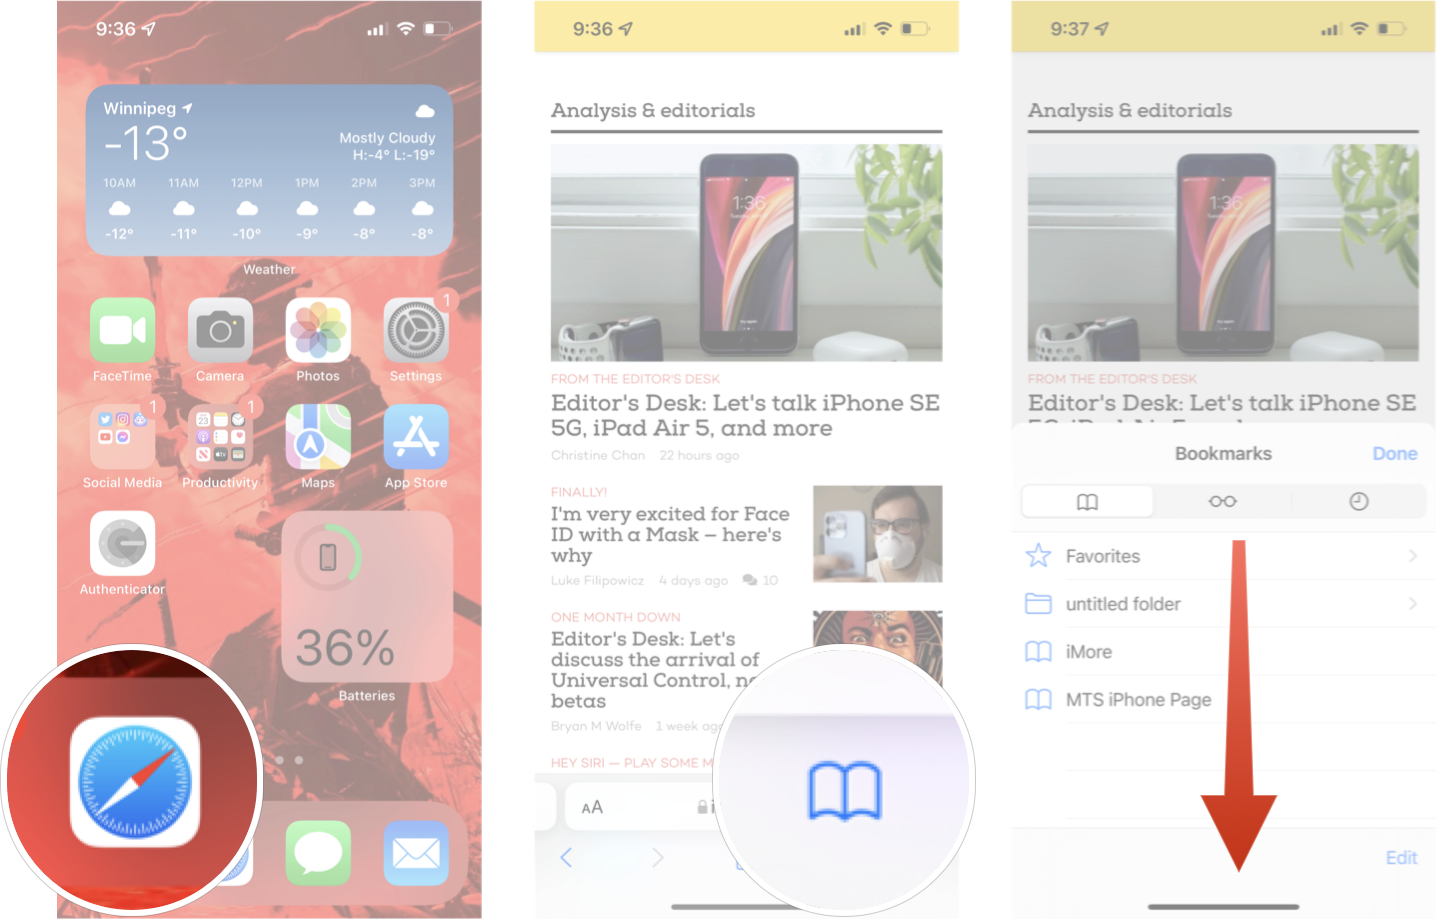 How To Search Bookmark In Safari on iPhone: Launch Safari, tap the bookmark button, and then swipe down on the bookmark list to reveal the search bar. 